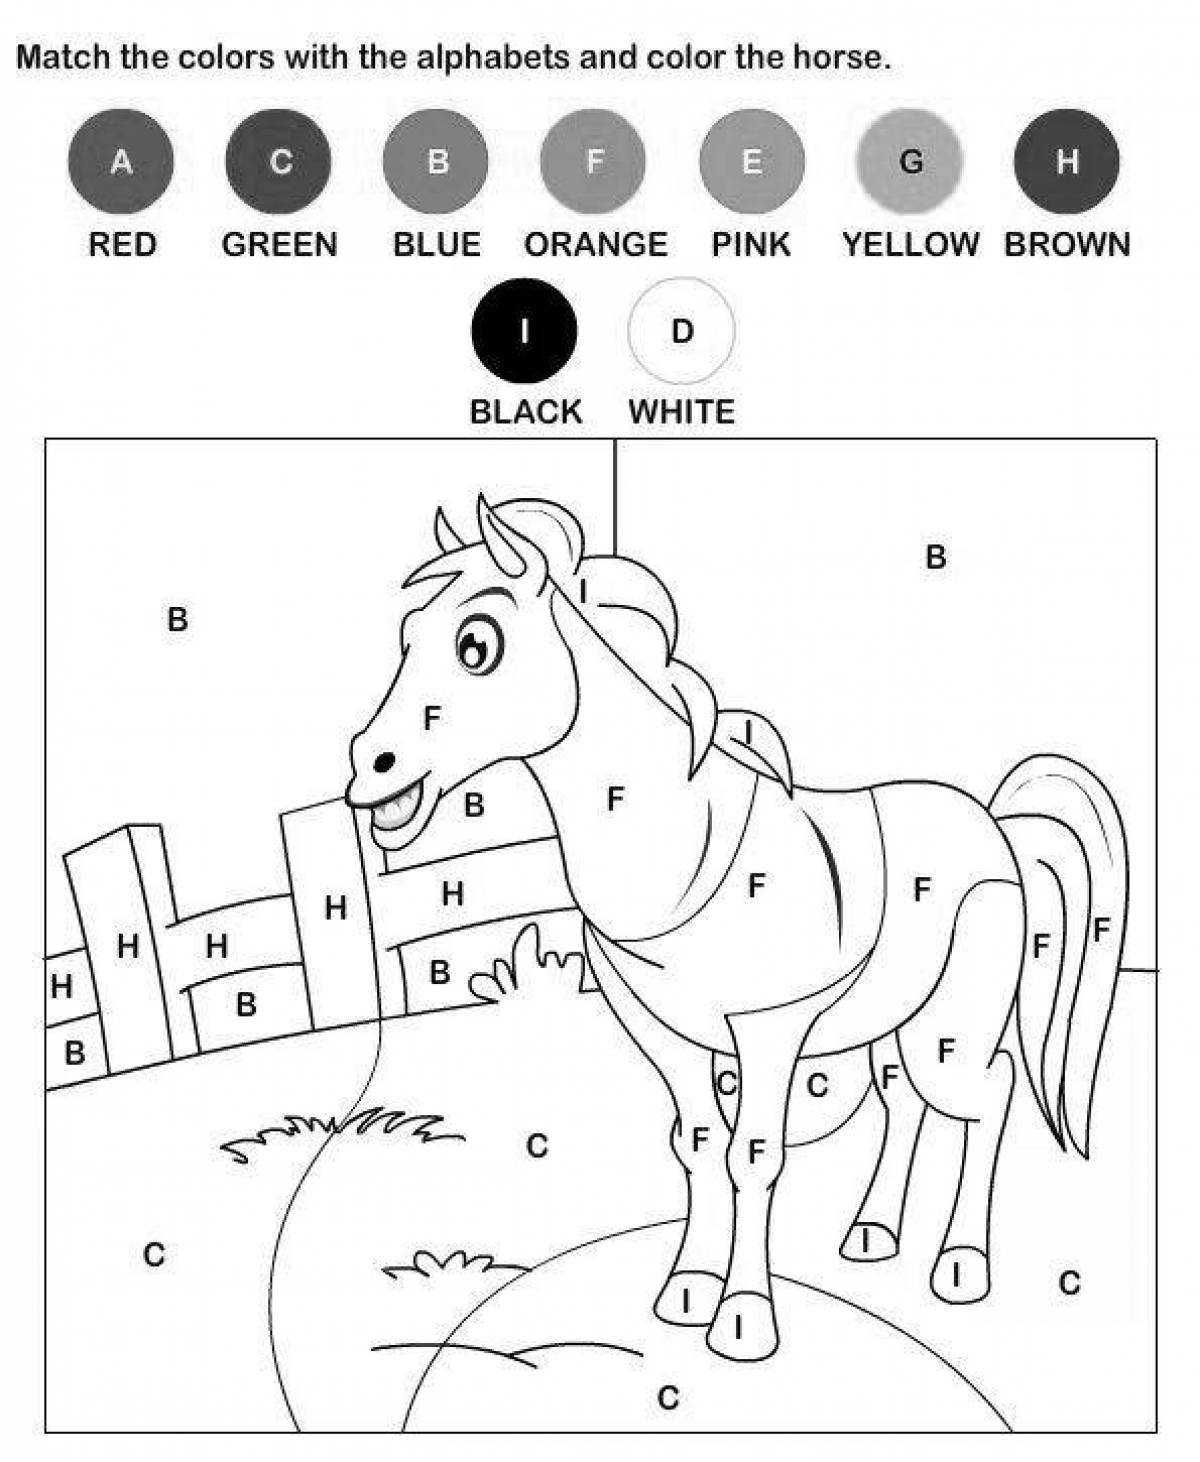 Exquisite horse coloring by numbers